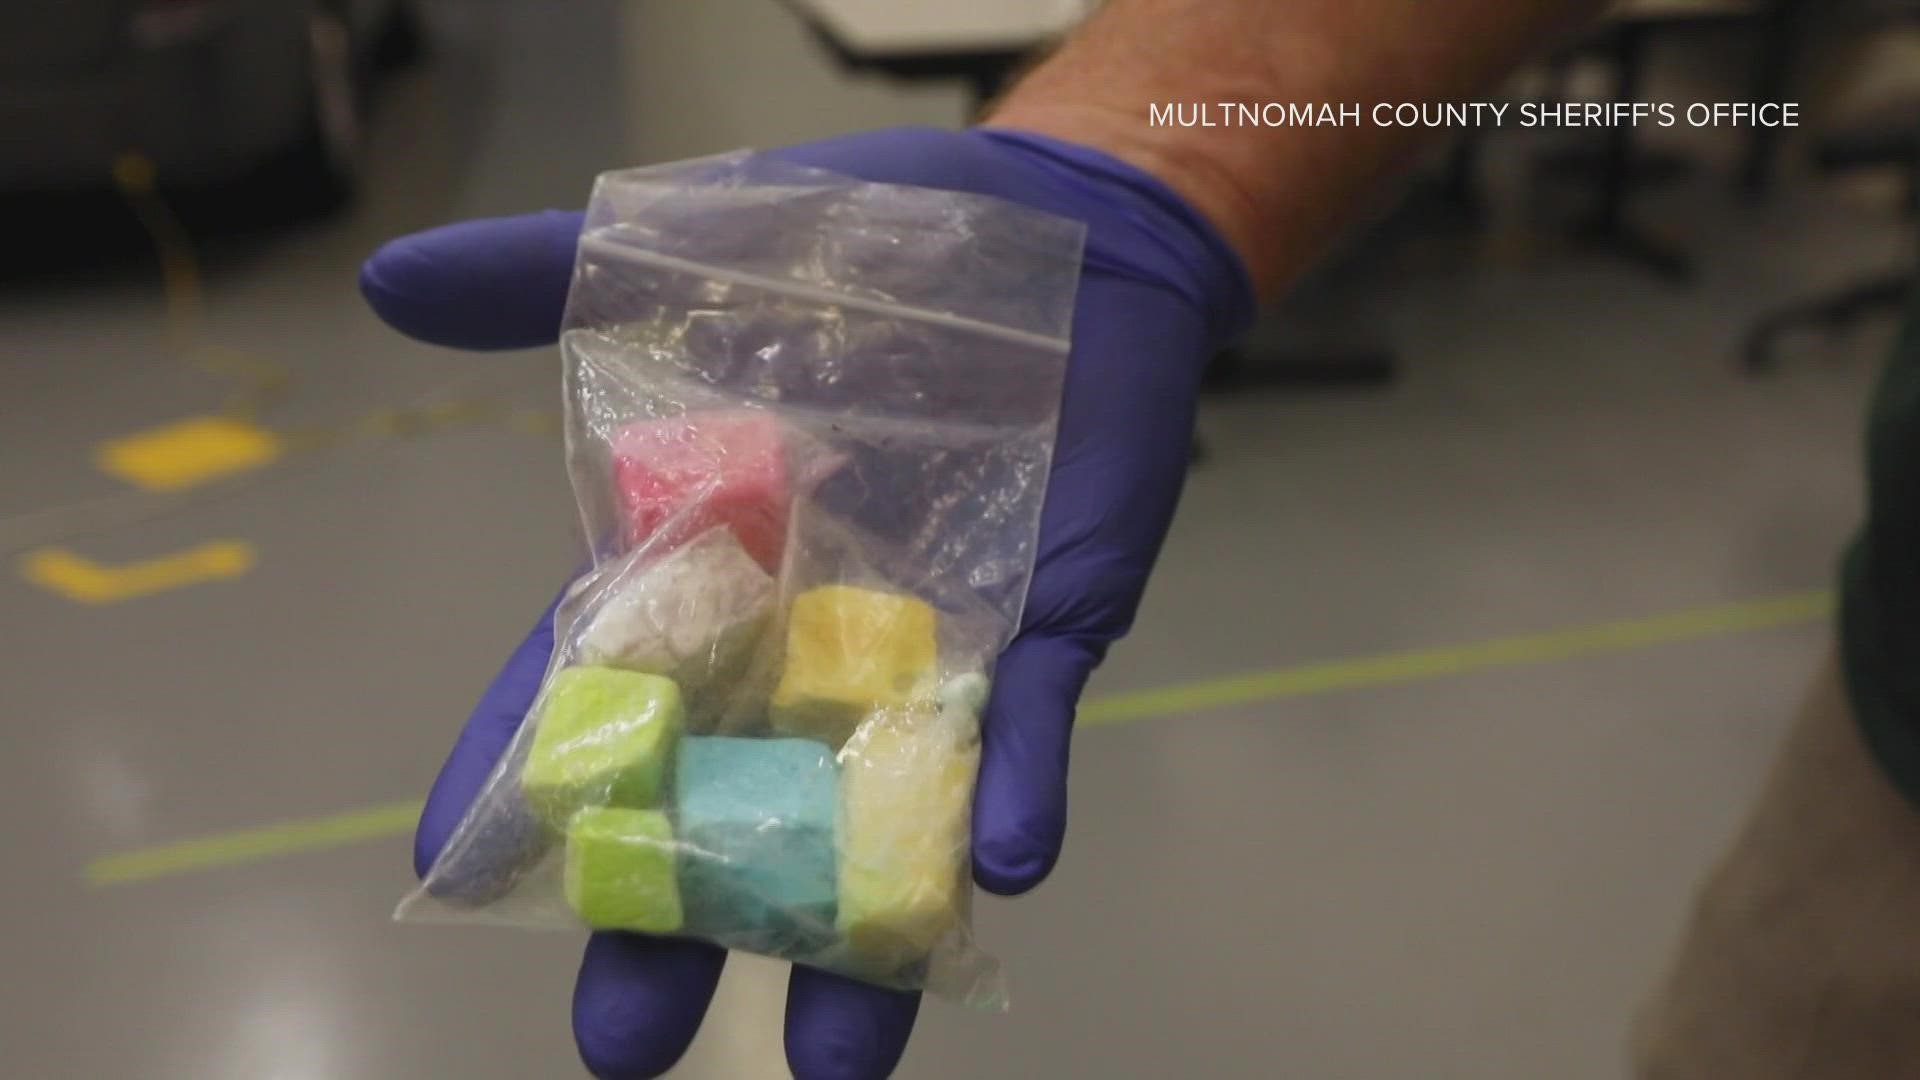 The synthetic opioid dyed various colors could "easily be mistaken for candy," according to the sheriff's office.